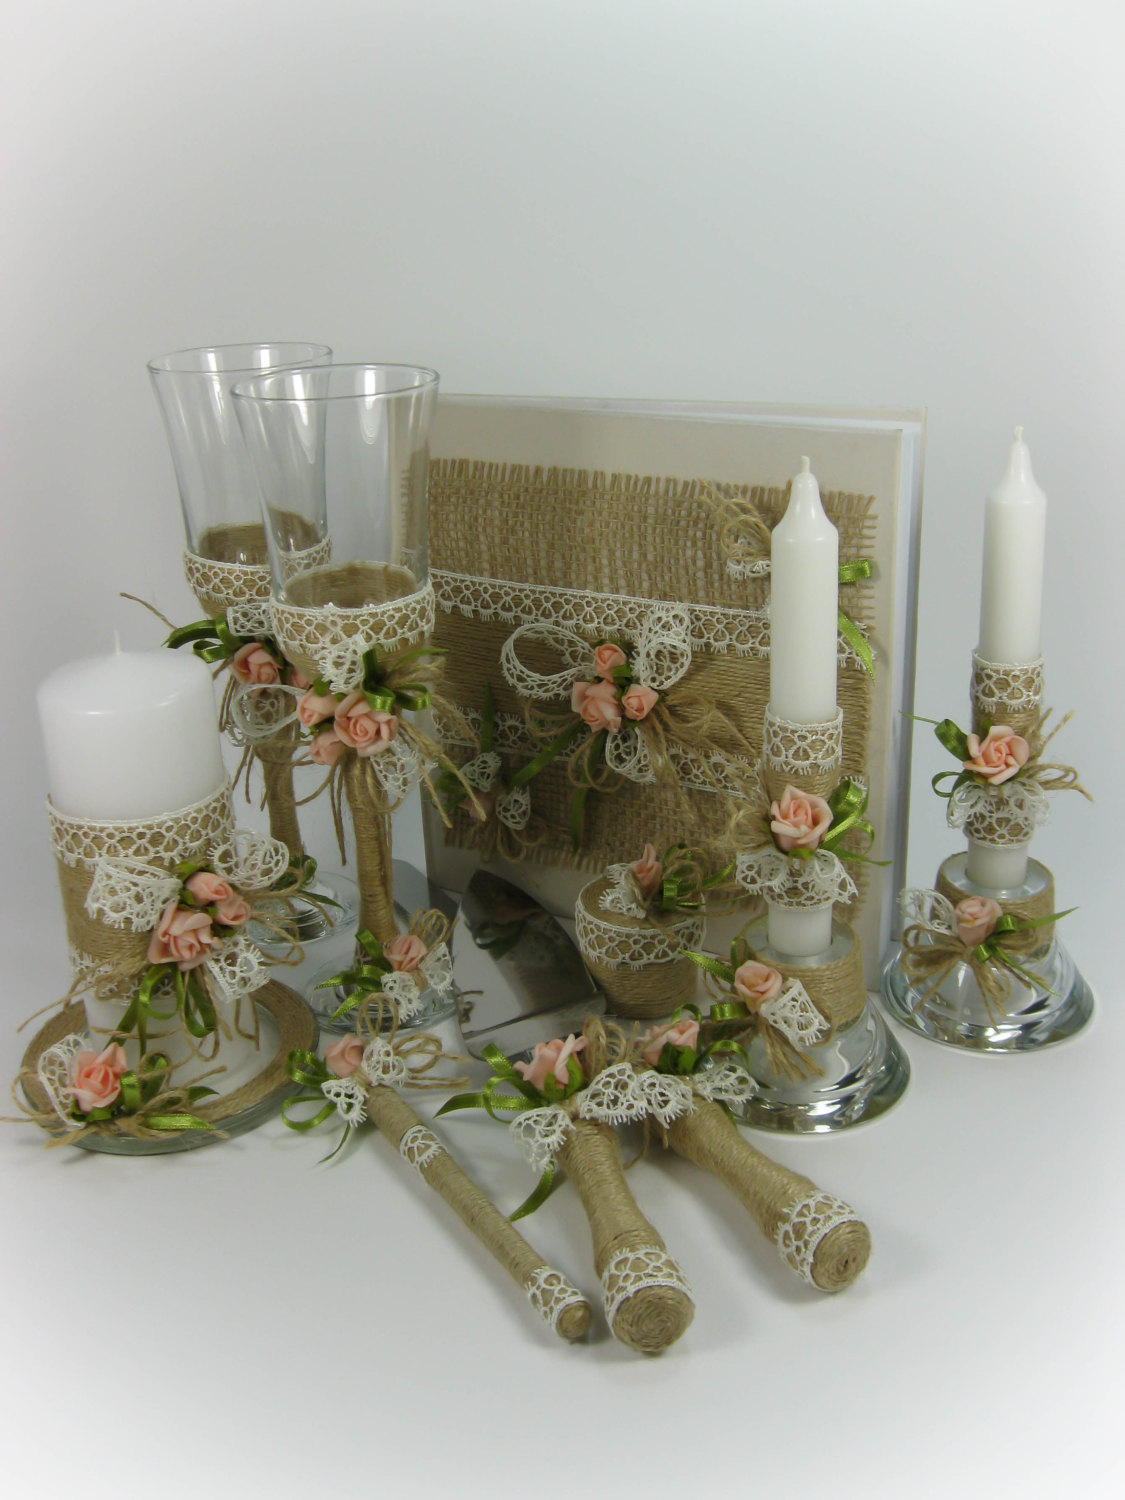 10 Piece Rustic Wedding Set, Rustic Glasses, Rustic Guest Book, Rustic Guestbook, Unity Candle, Cake Server, Cake Knife, Ring Box, Pen